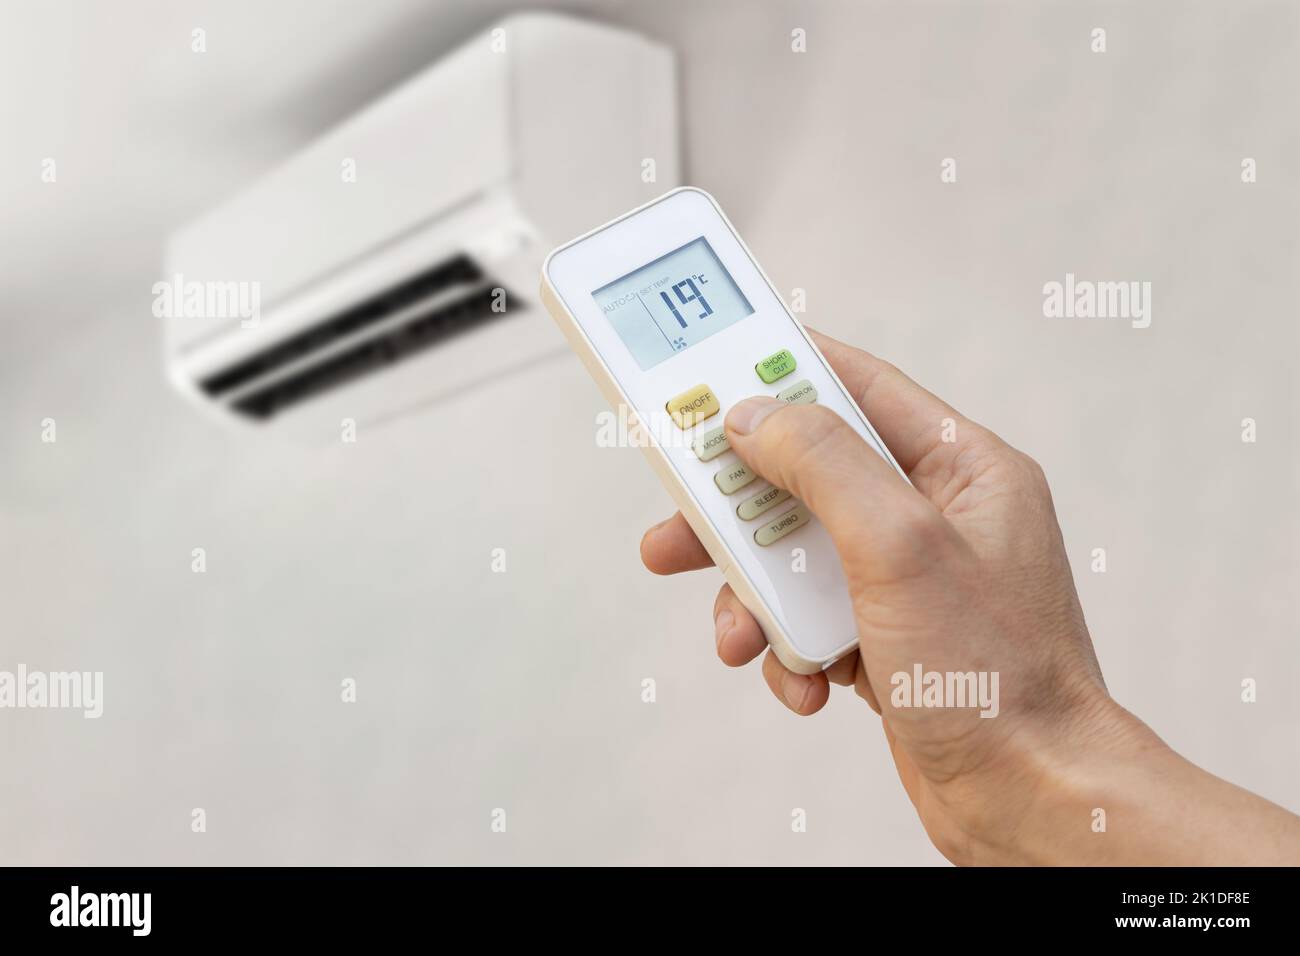 Hand with remote control of an air conditioner setting the temperature to 19 degrees. Energy saving concept. Stock Photo